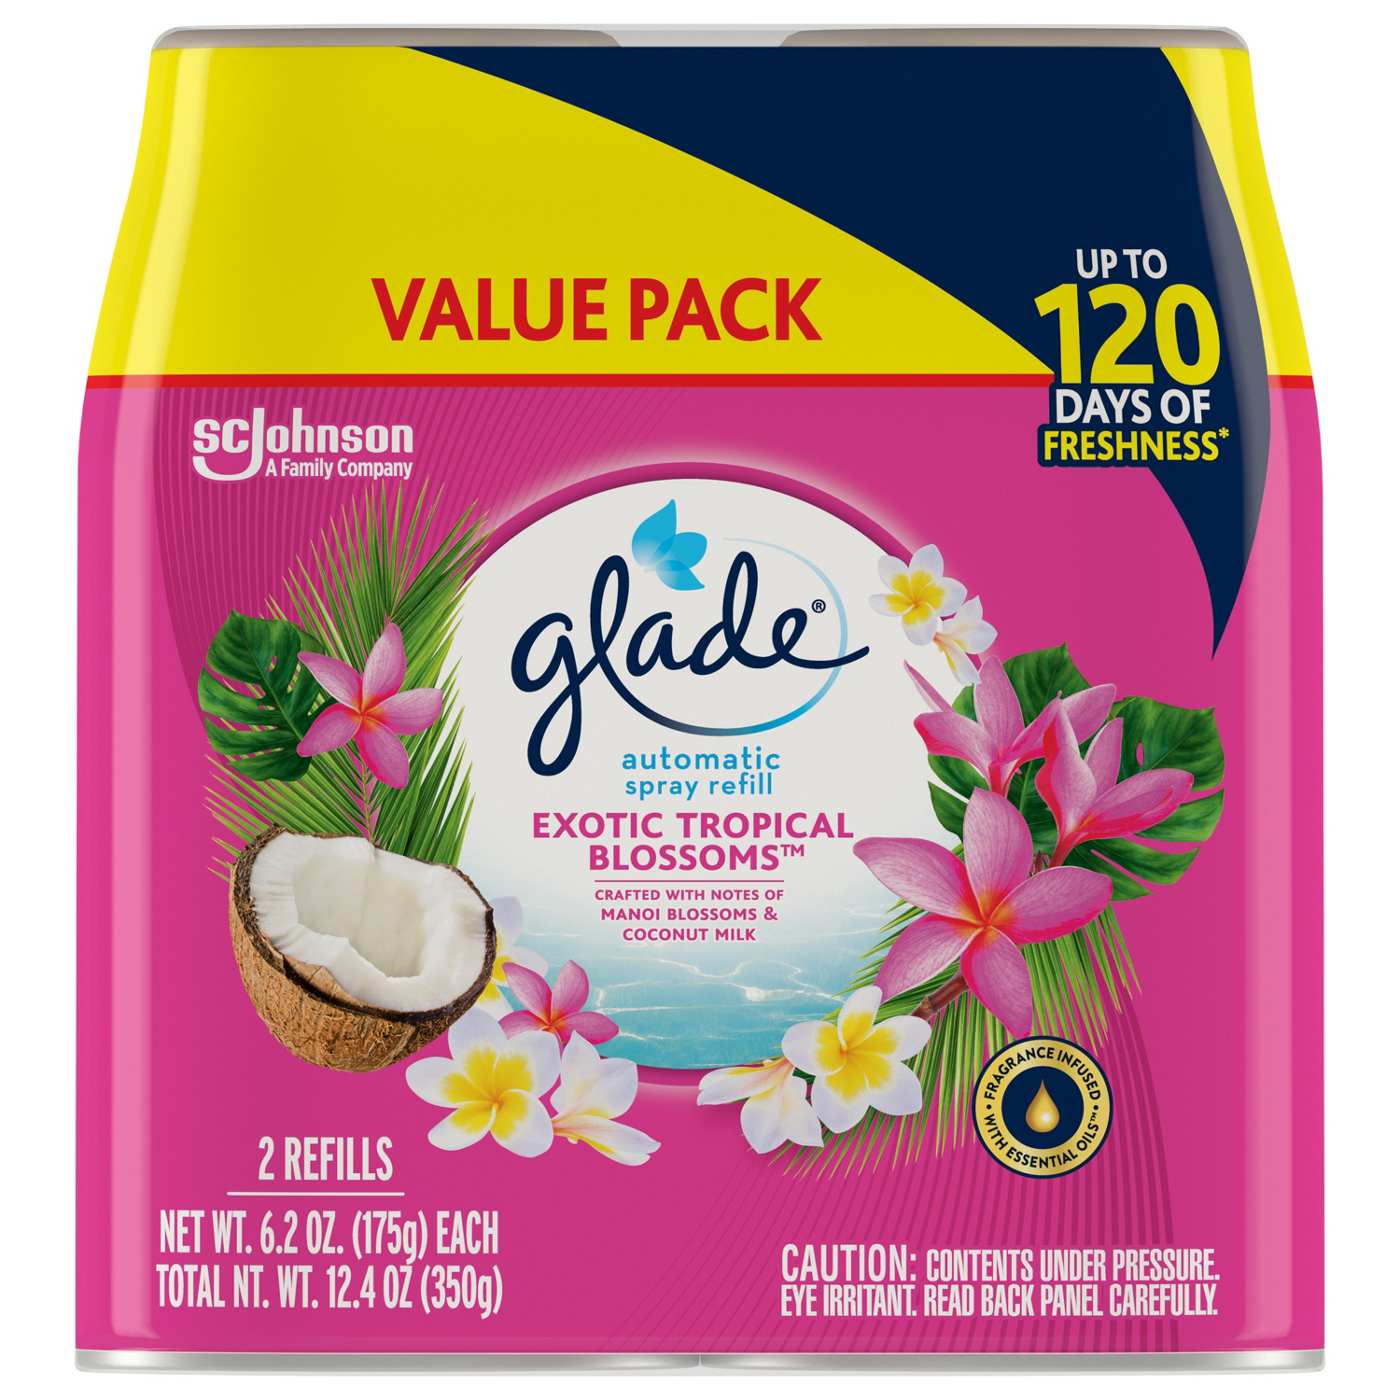 Glade Automatic Spray Refill, Value Pack - Exotic Tropical Blossoms; image 2 of 3